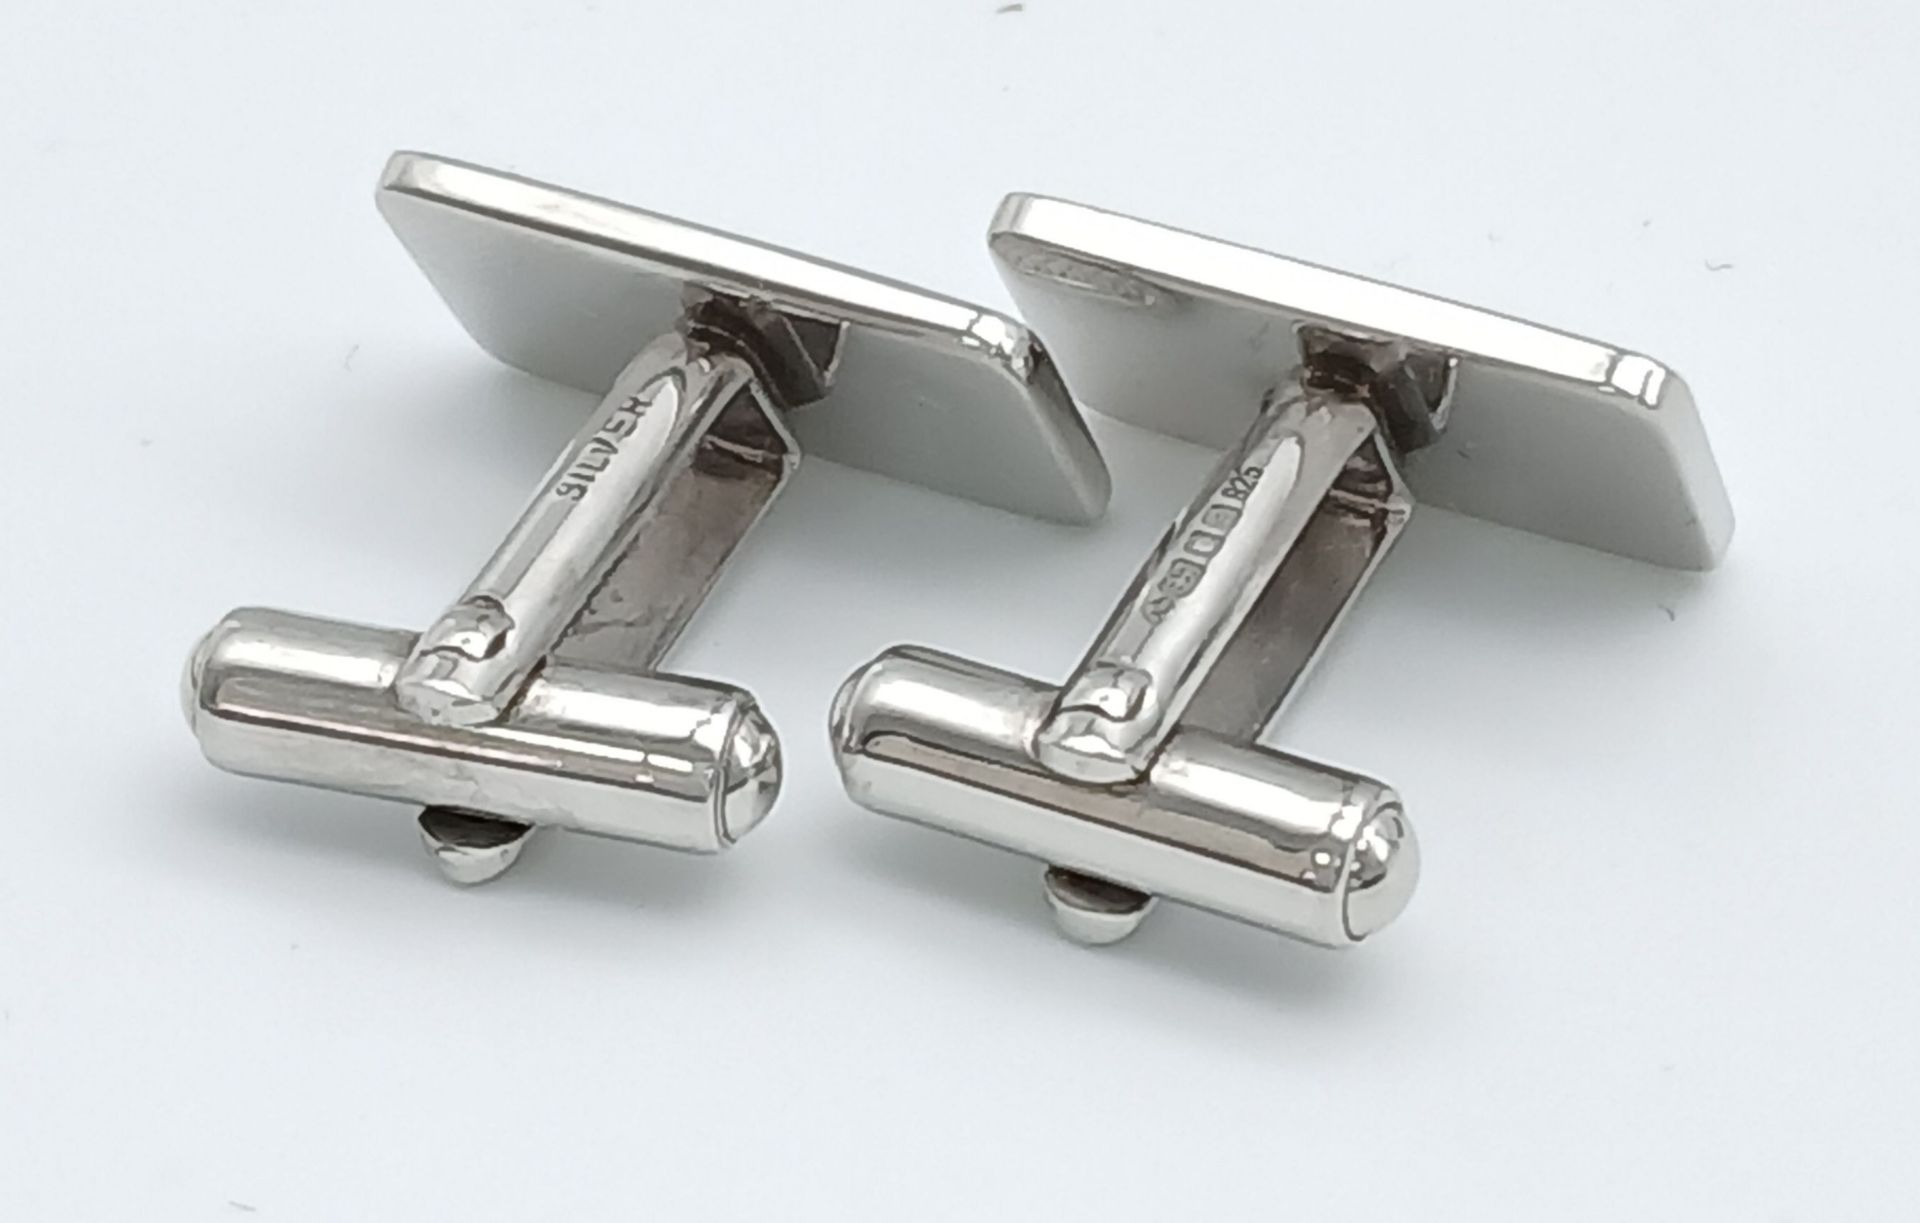 An Excellent Condition Pair of 1985 Hallmarked Sterling Silver Engine Turned Cufflinks by Dunhill. - Image 2 of 7